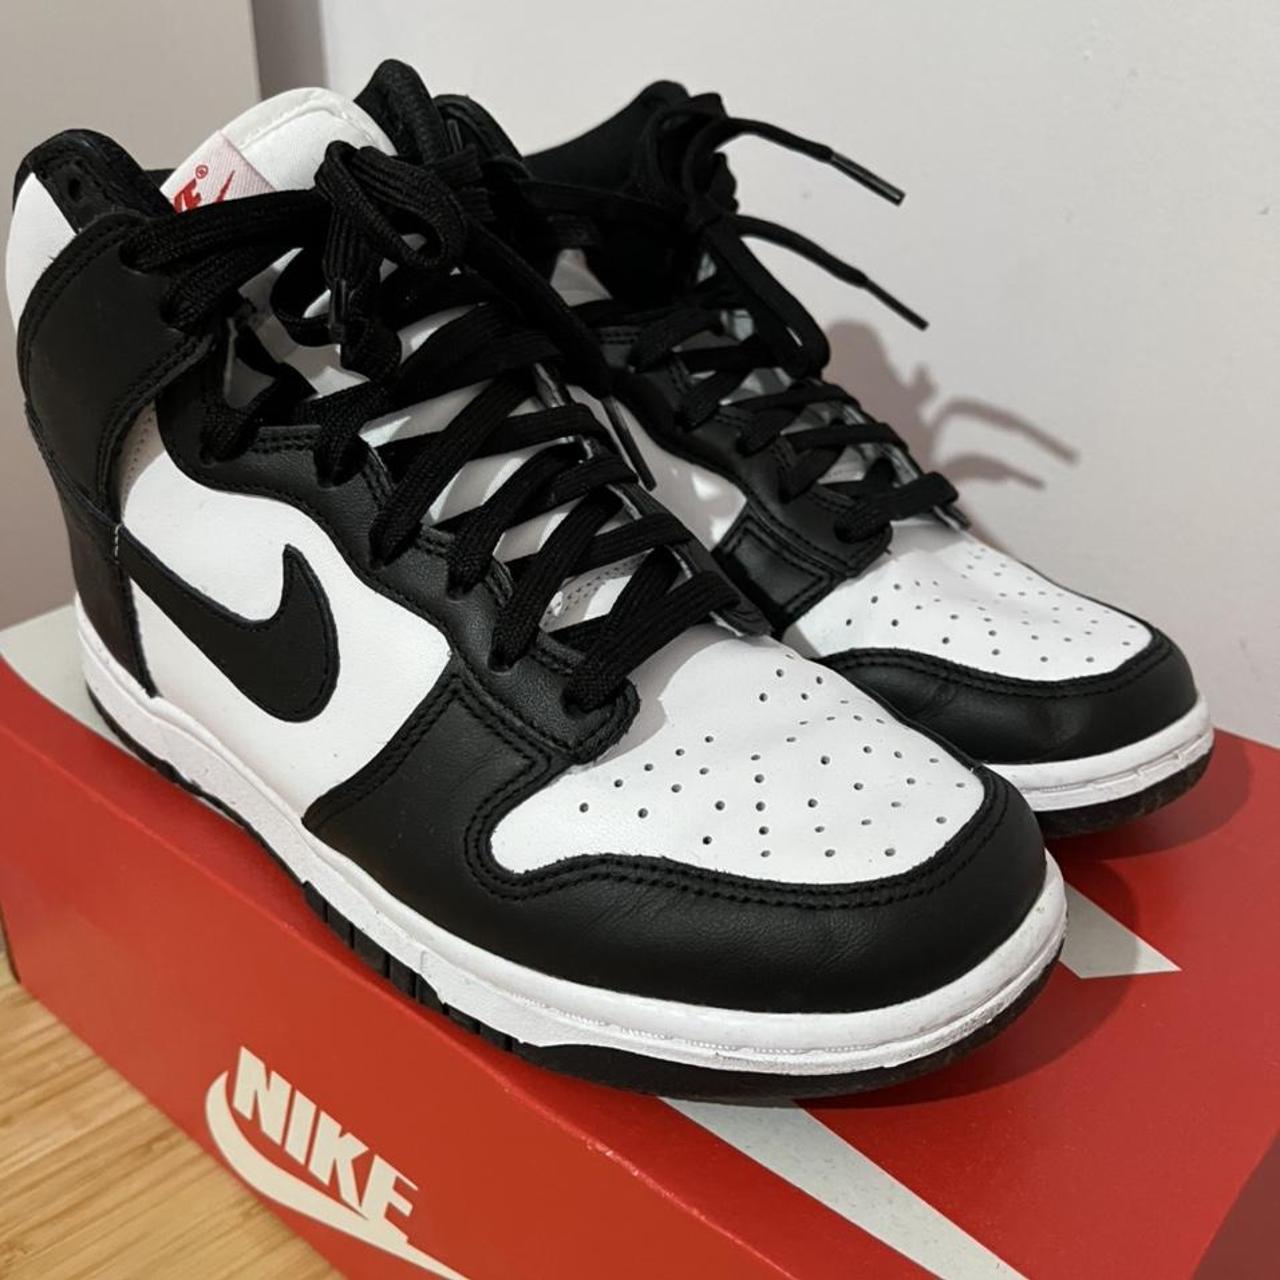 Want to sell high dunk pandas size 7 woman’s - Depop